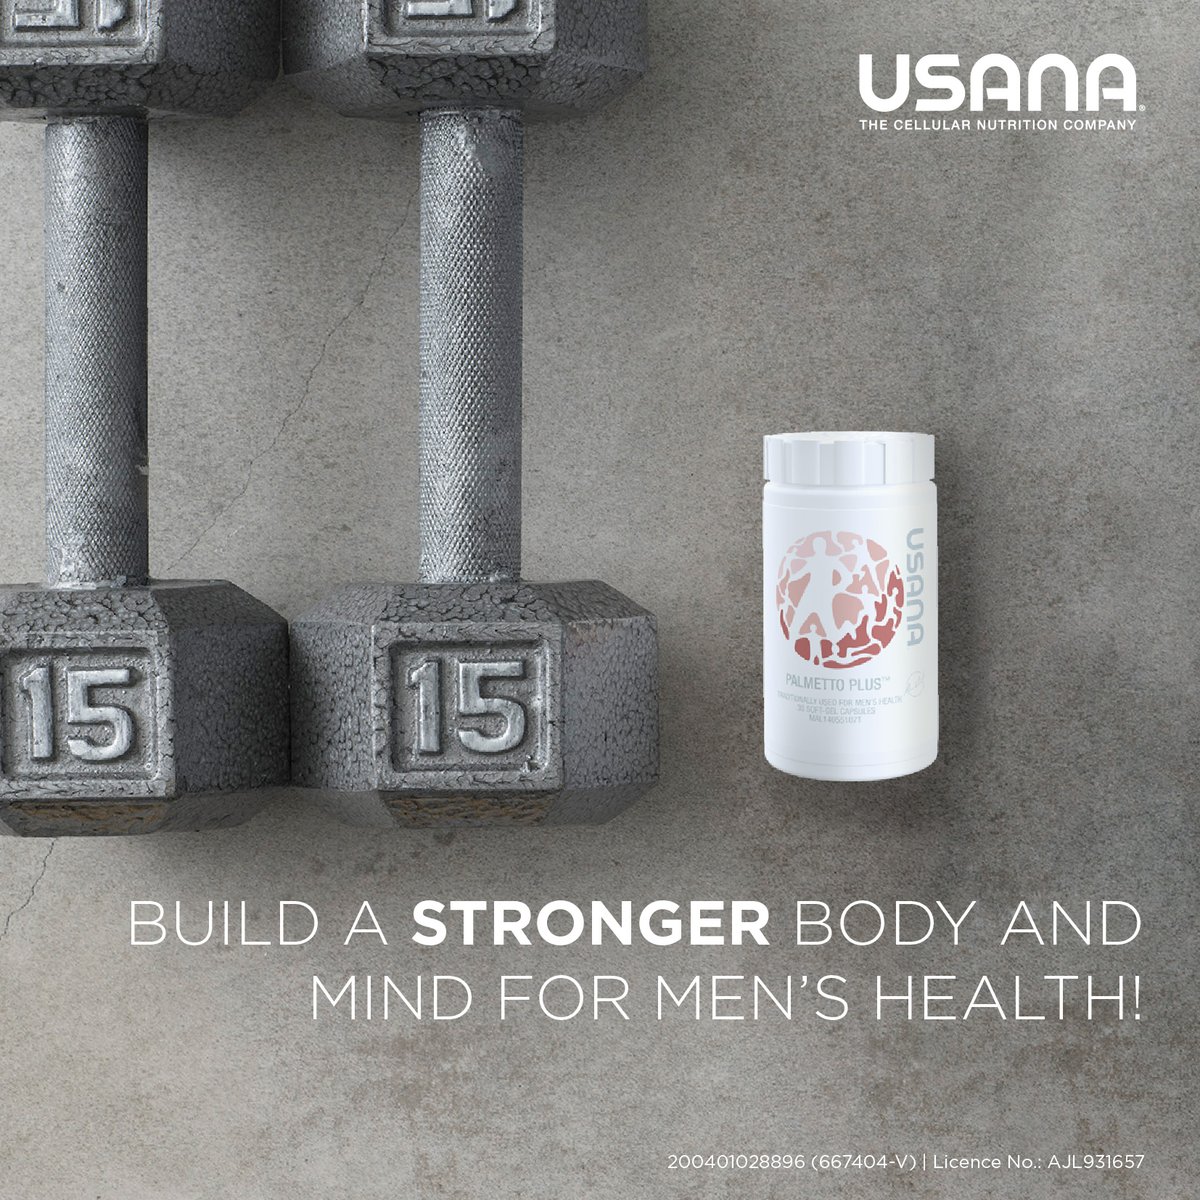 You’re a man, and no matter your age, you should take prostate health seriously. That’s why USANA created a convenient, effective way to obtain comprehensive men’s health with a formulation designed to support a healthy prostate and cardiovascular health.